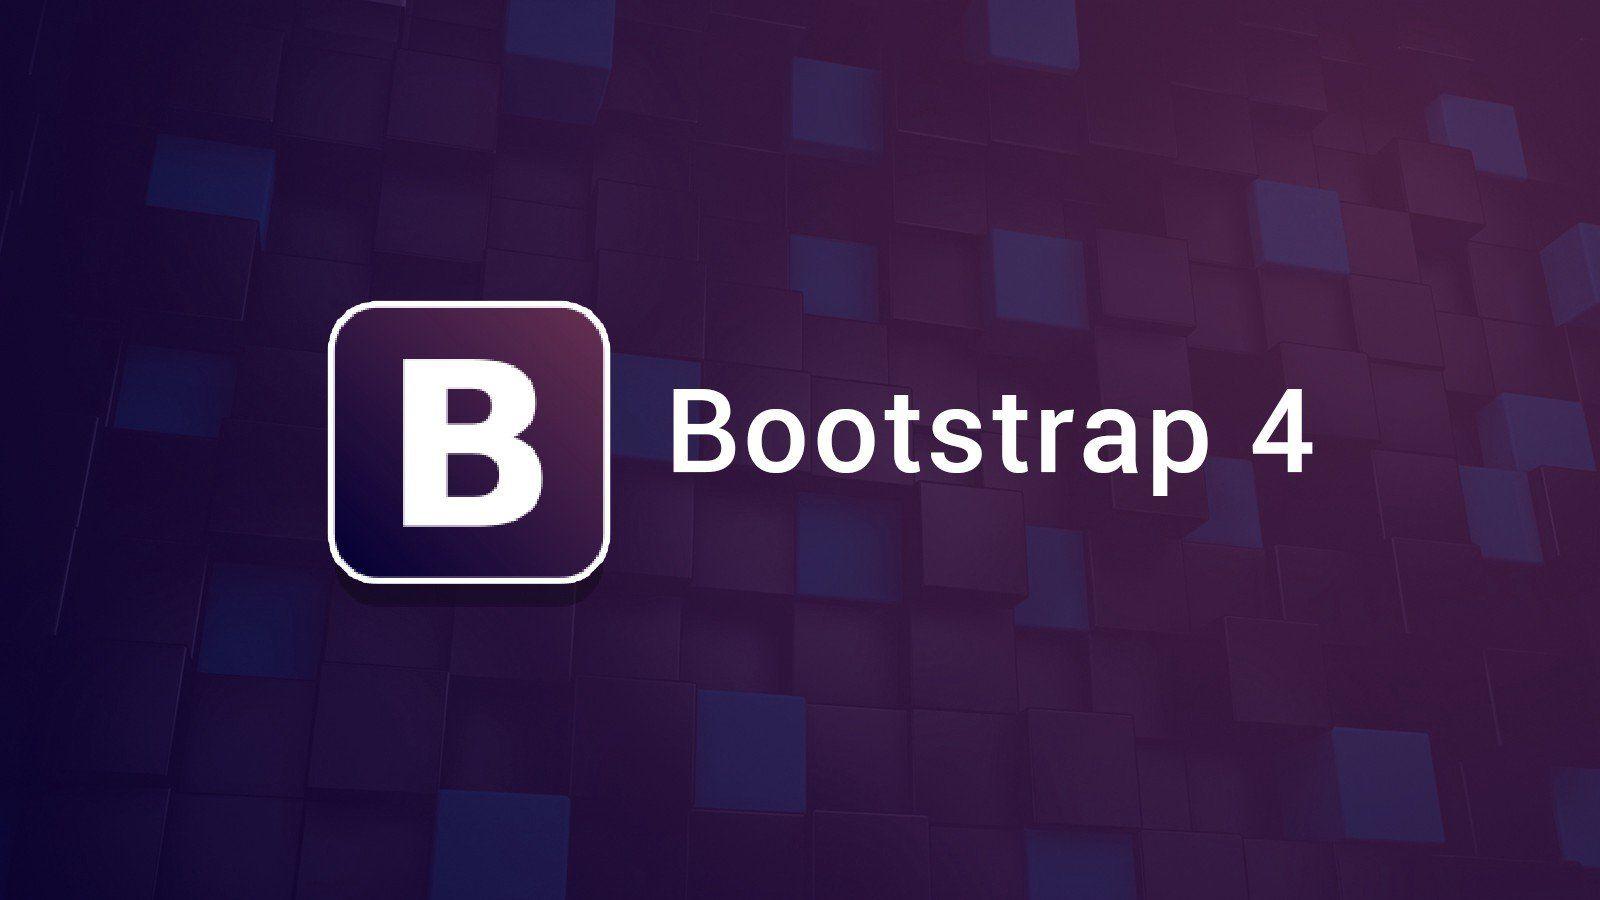 80+ Free Bootstrap Templates You Can't Miss in 2022